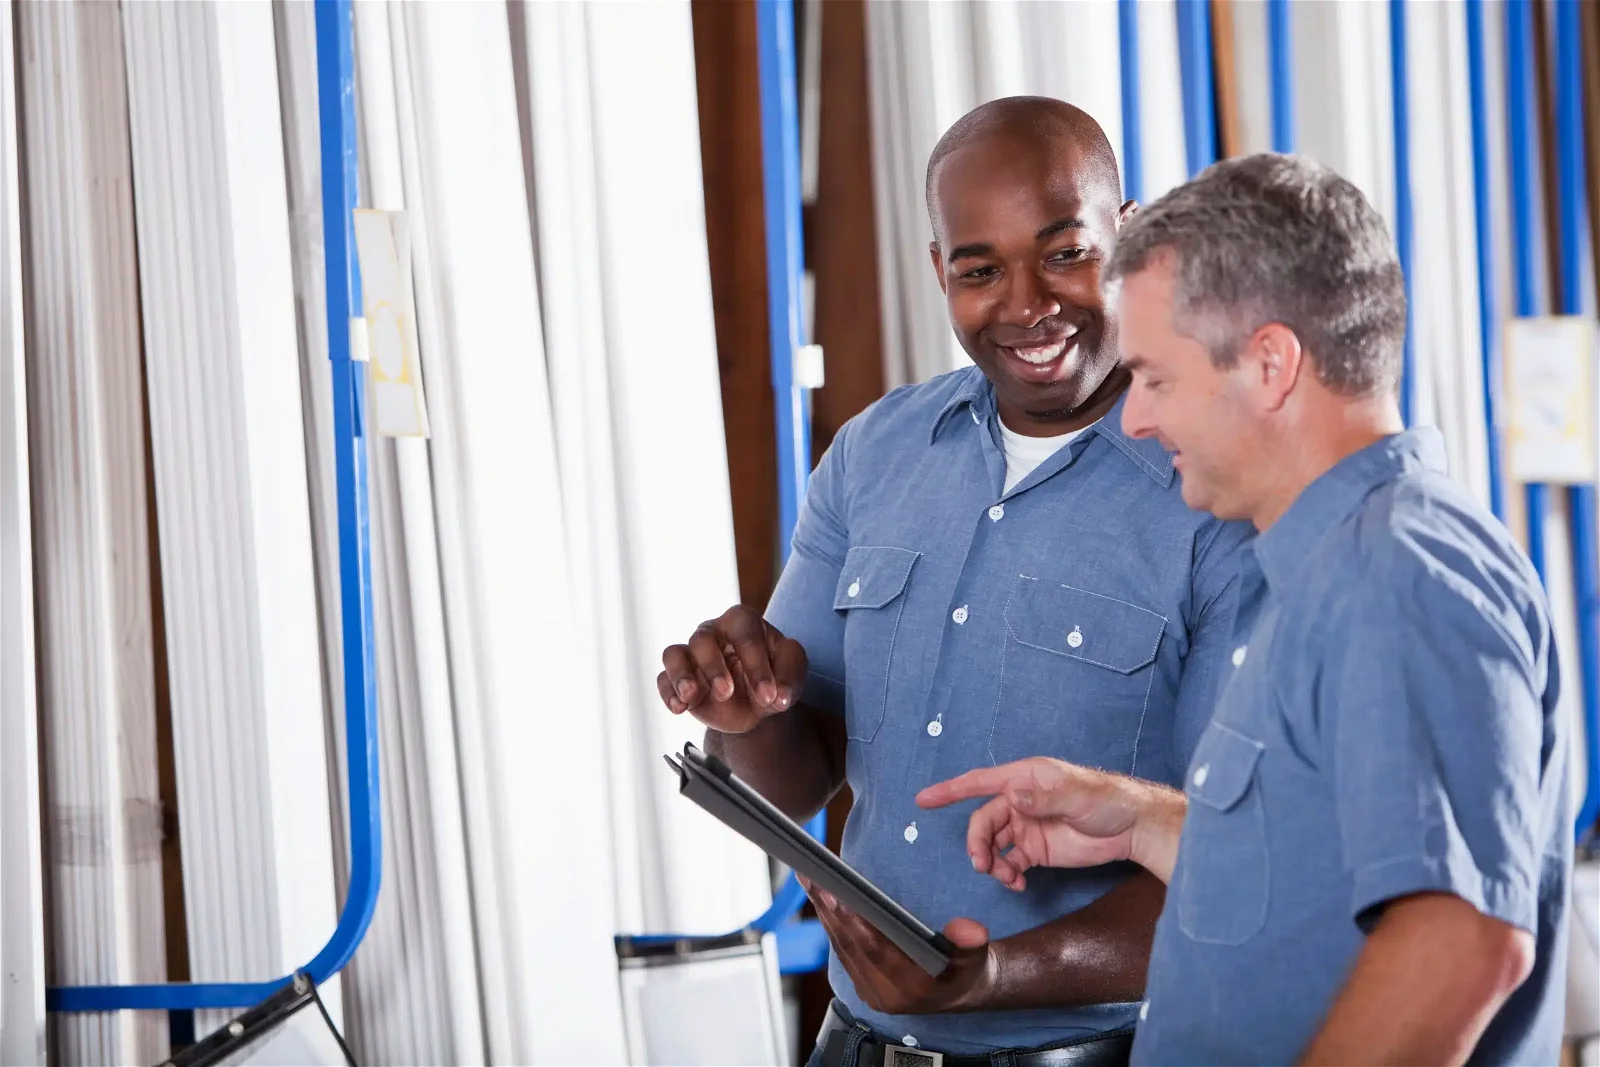 Two men in blue work shirts are discussing something on a tablet while standing in a warehouse aisle with metal pipes in the background.